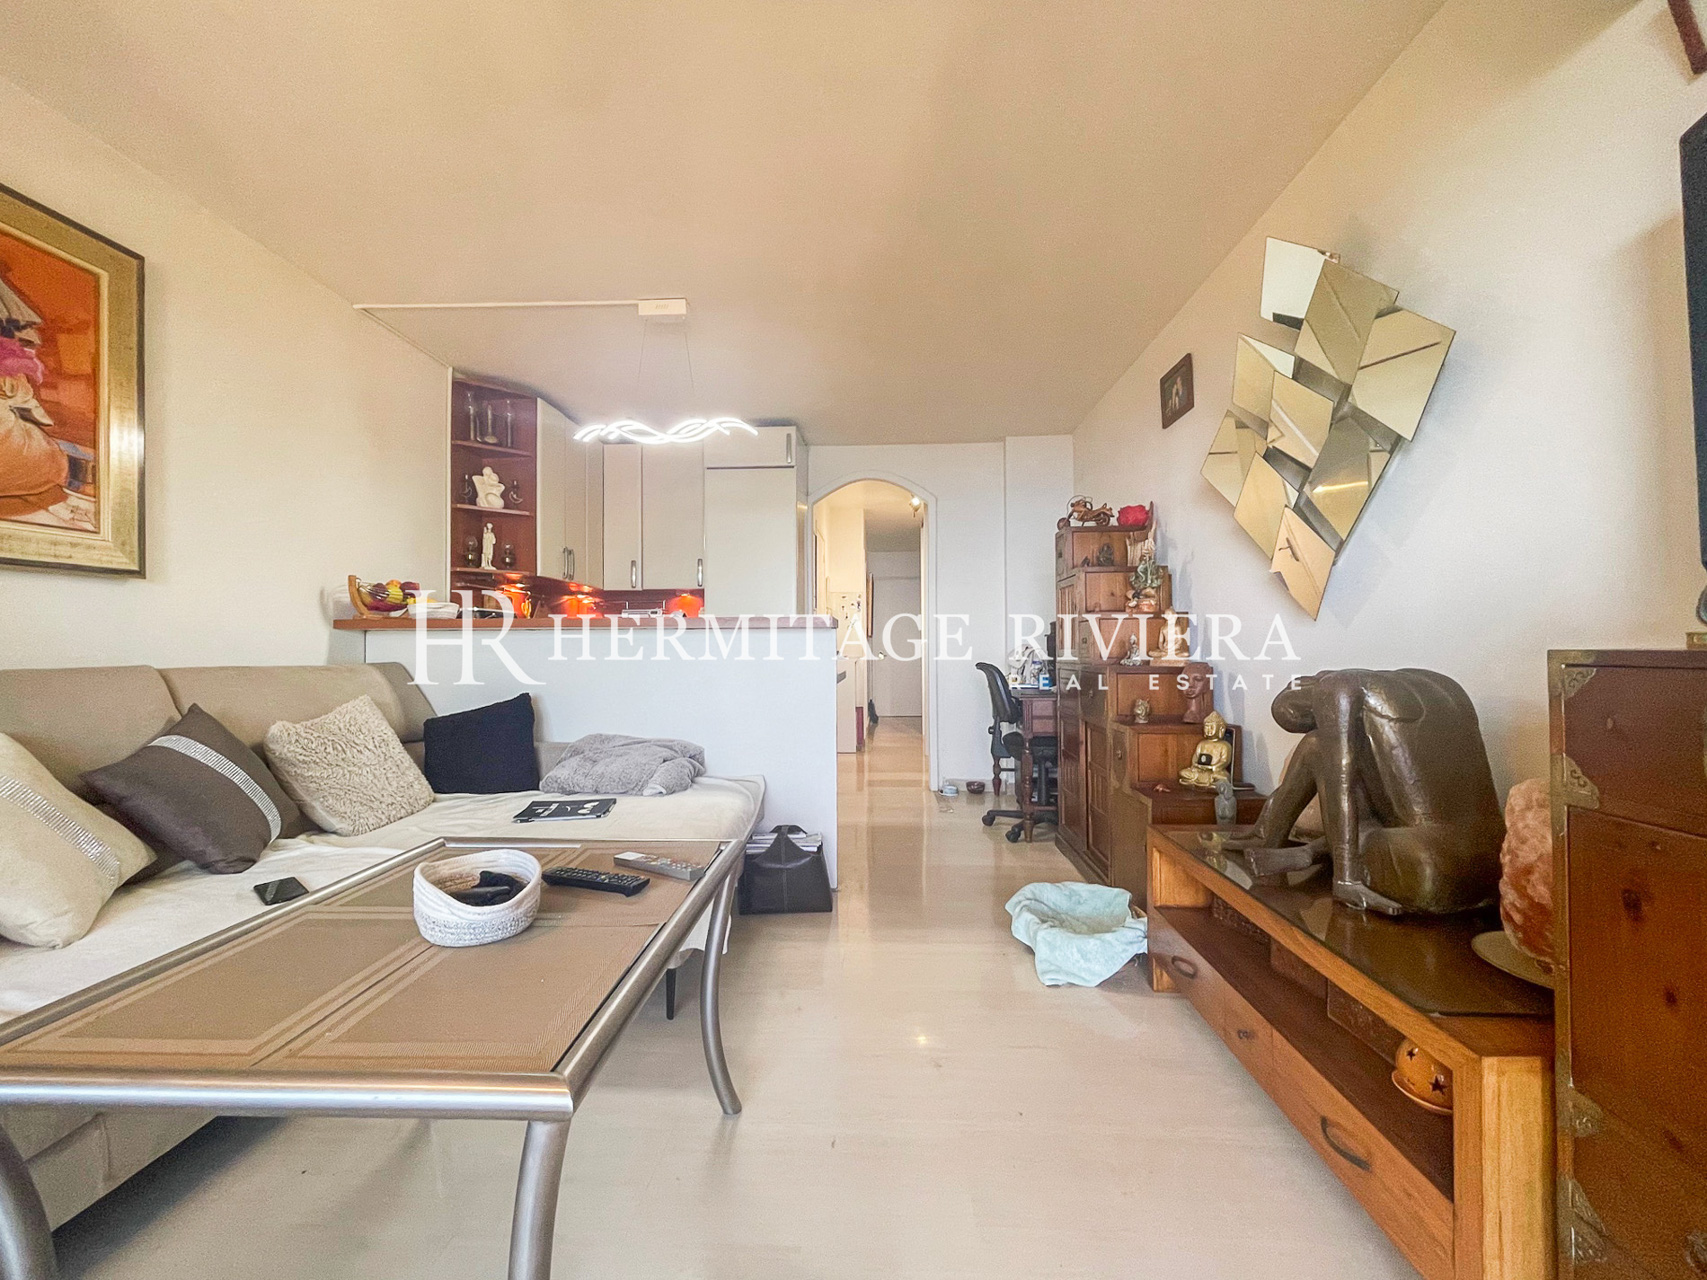 One bedroom apartment with loggia and sea view (image 4)